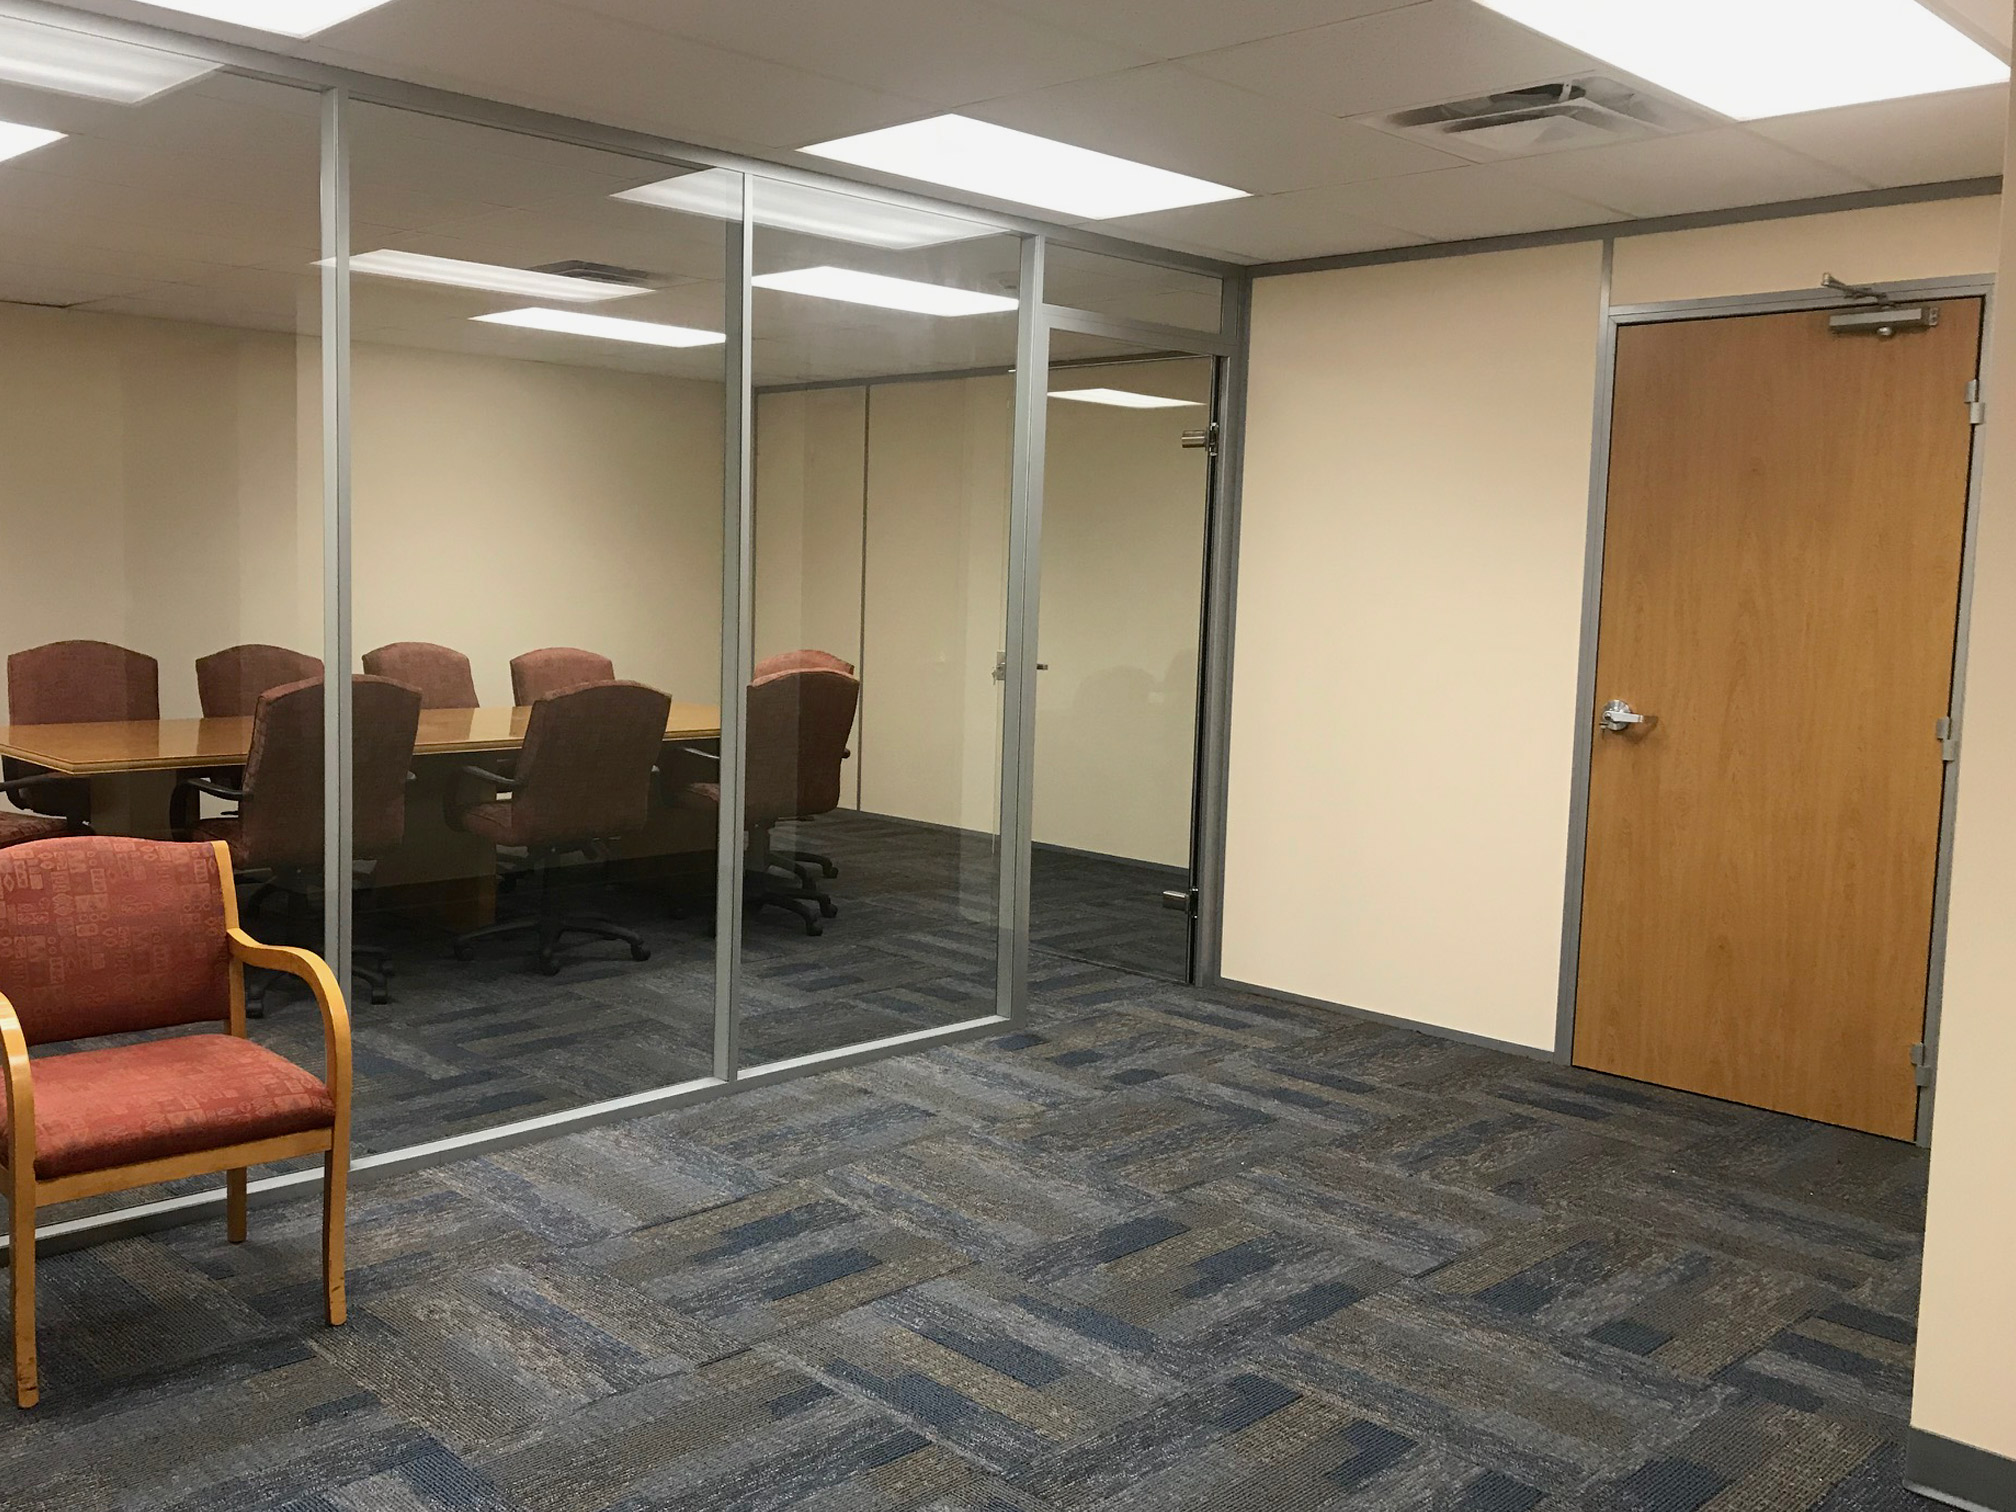 Glass conference room with swing doors - financial institution installation